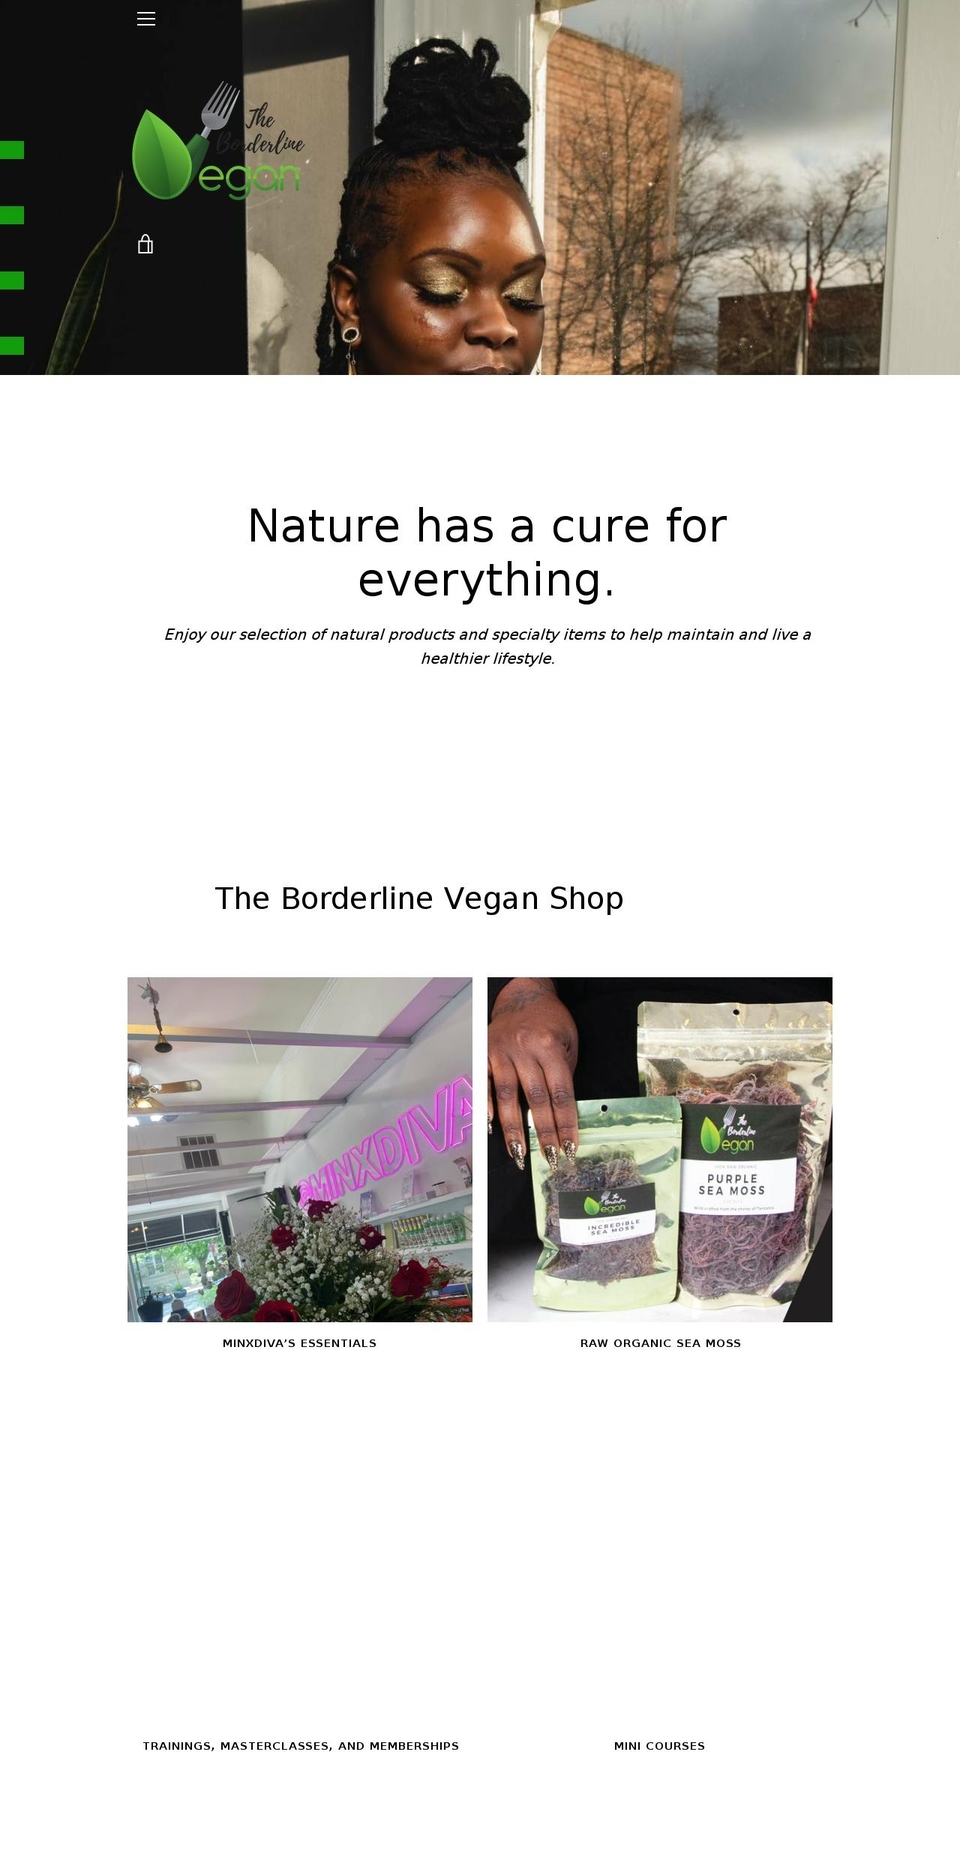 Narrative with Installments message Shopify theme site example theborderlinevegan.com